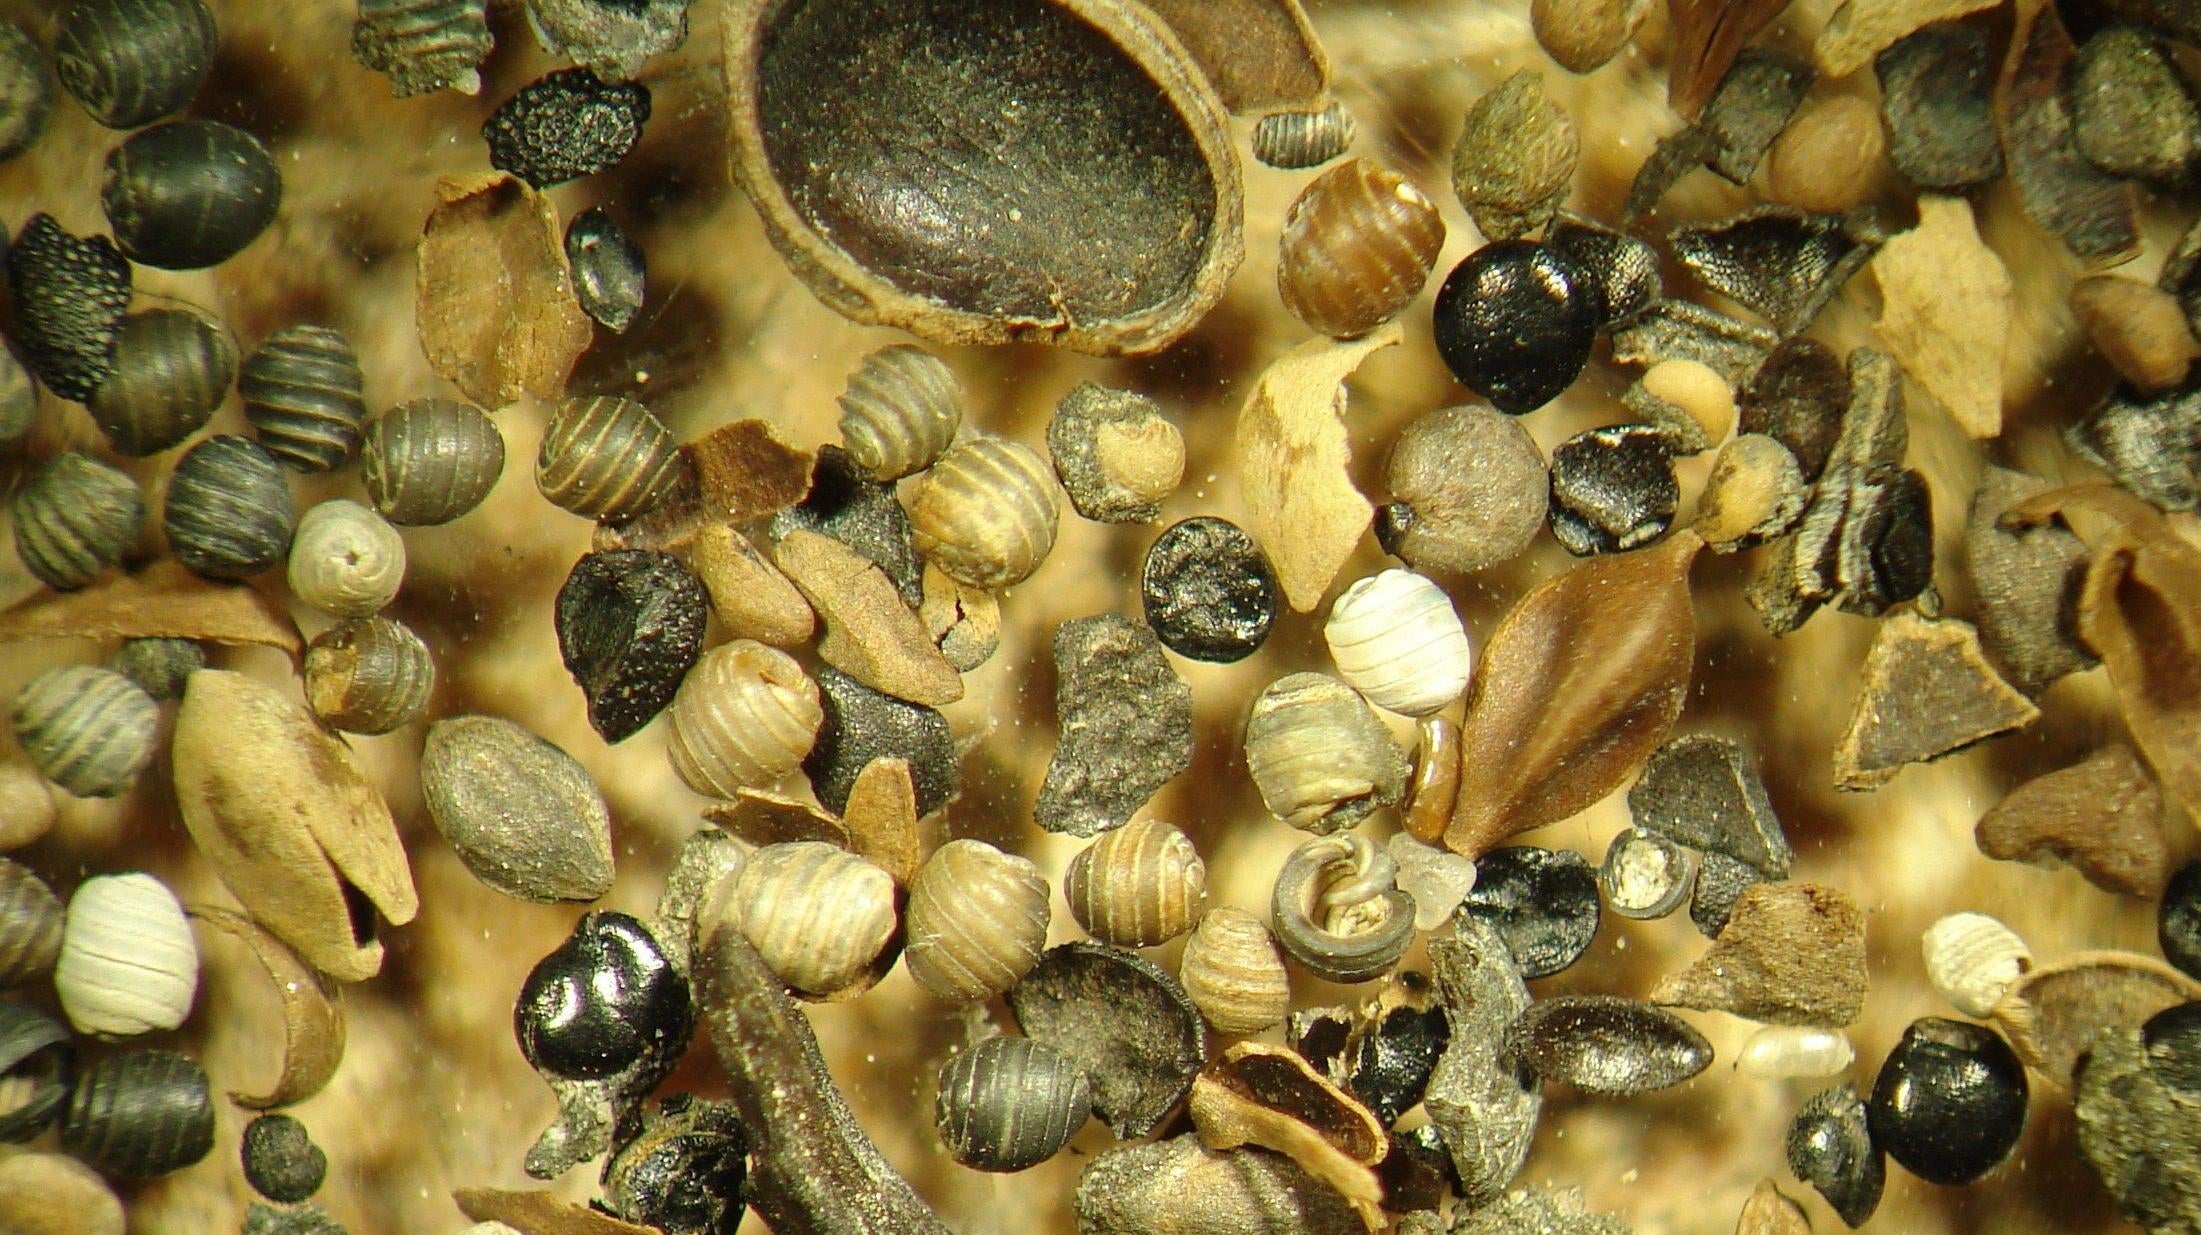 Oospores of stoneworts (algae) and charred seeds, among other organic remains pulled from the sediment.  (Image: Wim Kuijper, Leiden University, Other)